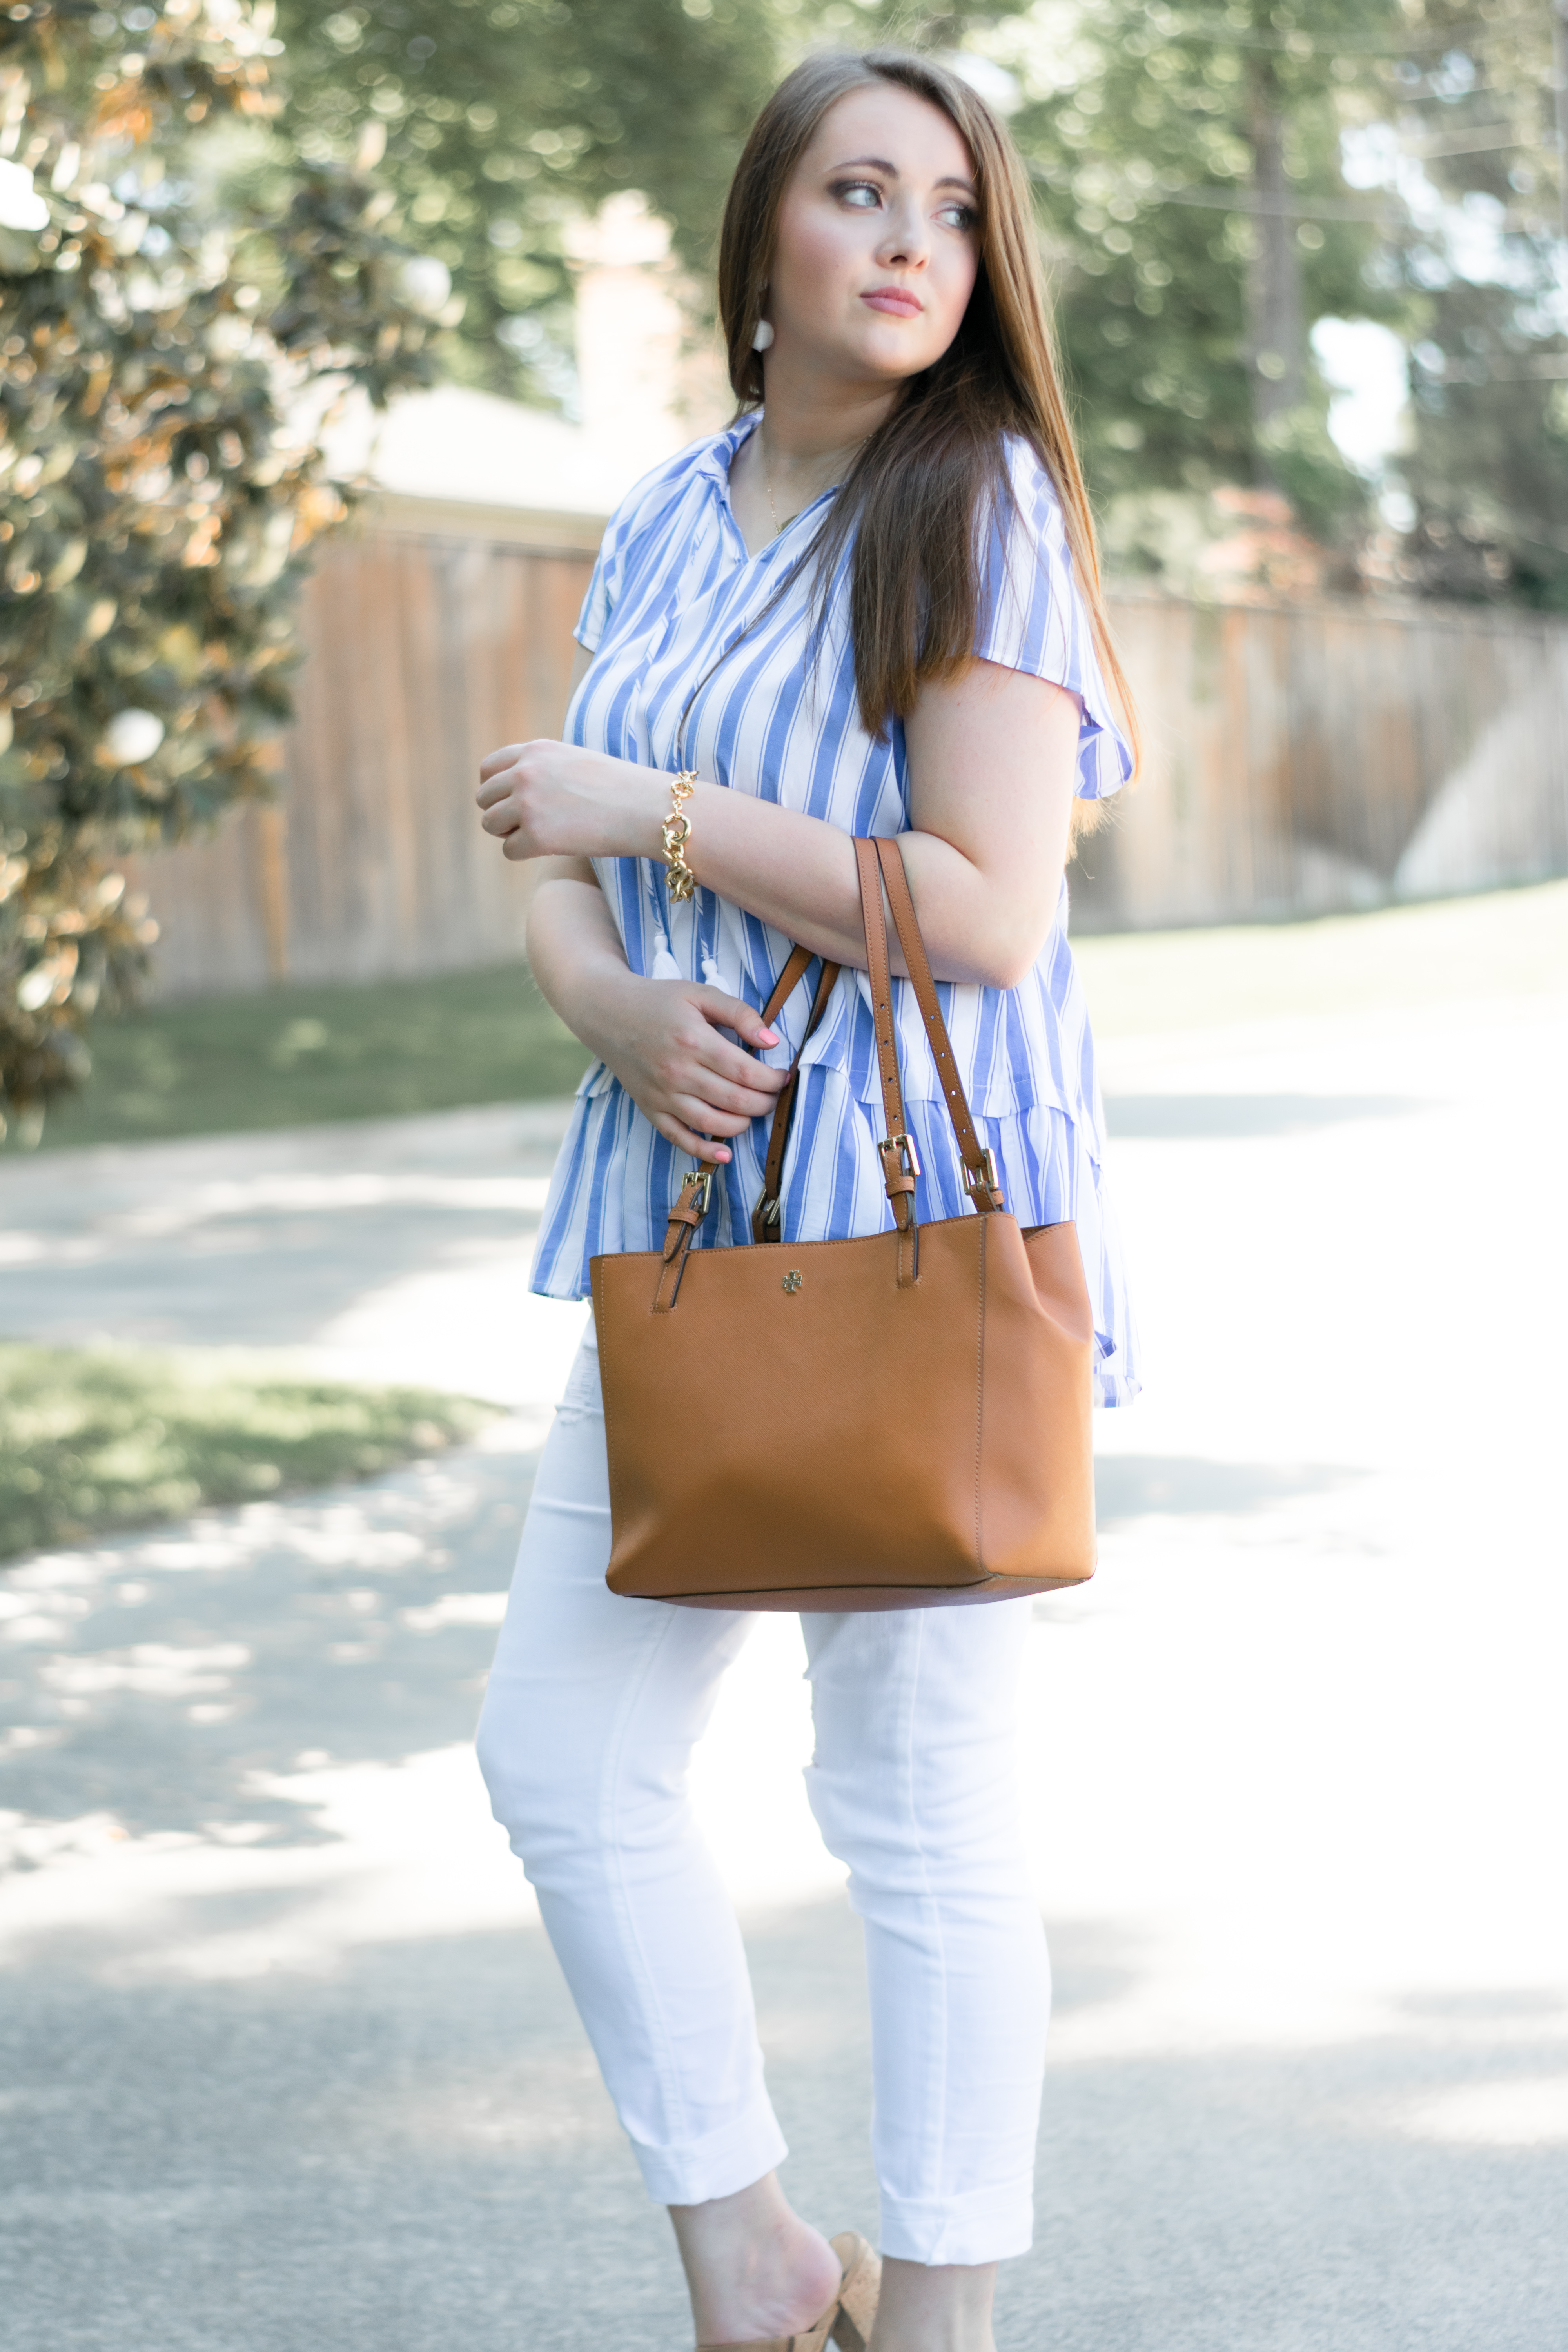 A Nautical Spring Top On Sale For $15!